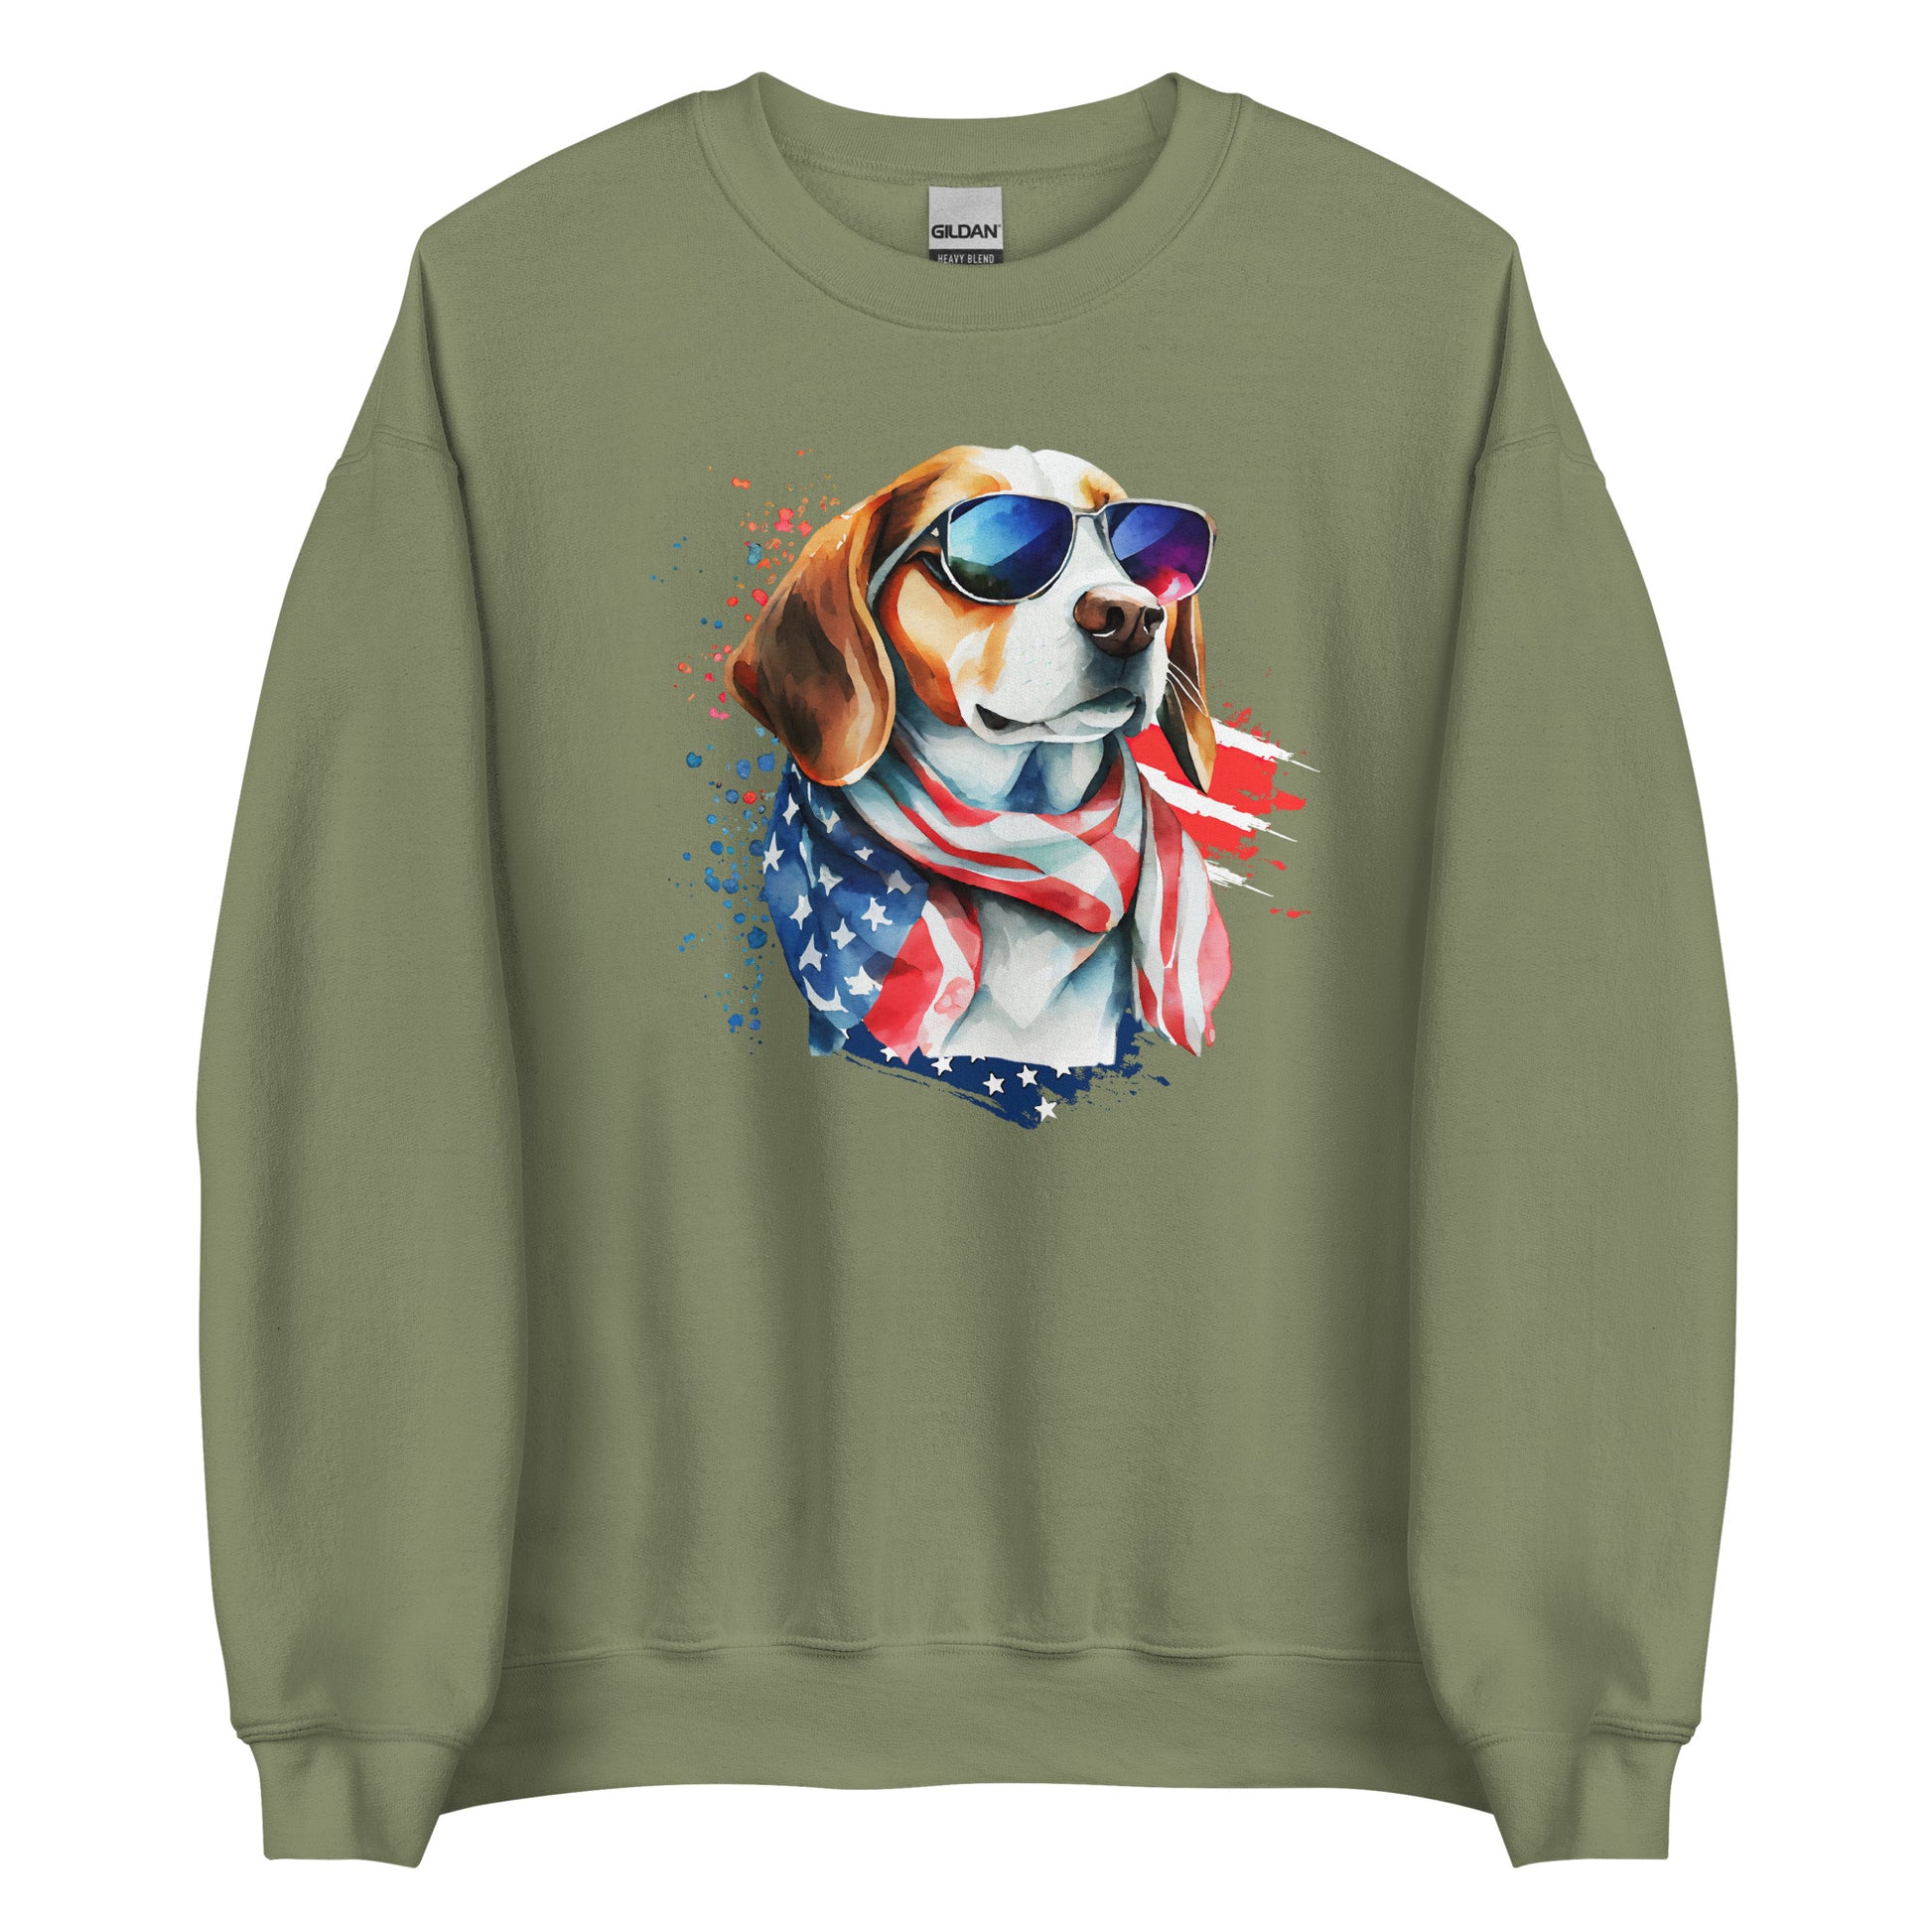 Olive Colored Patriot Sweatshirt Printed With Patriotic Dog And USA Colors